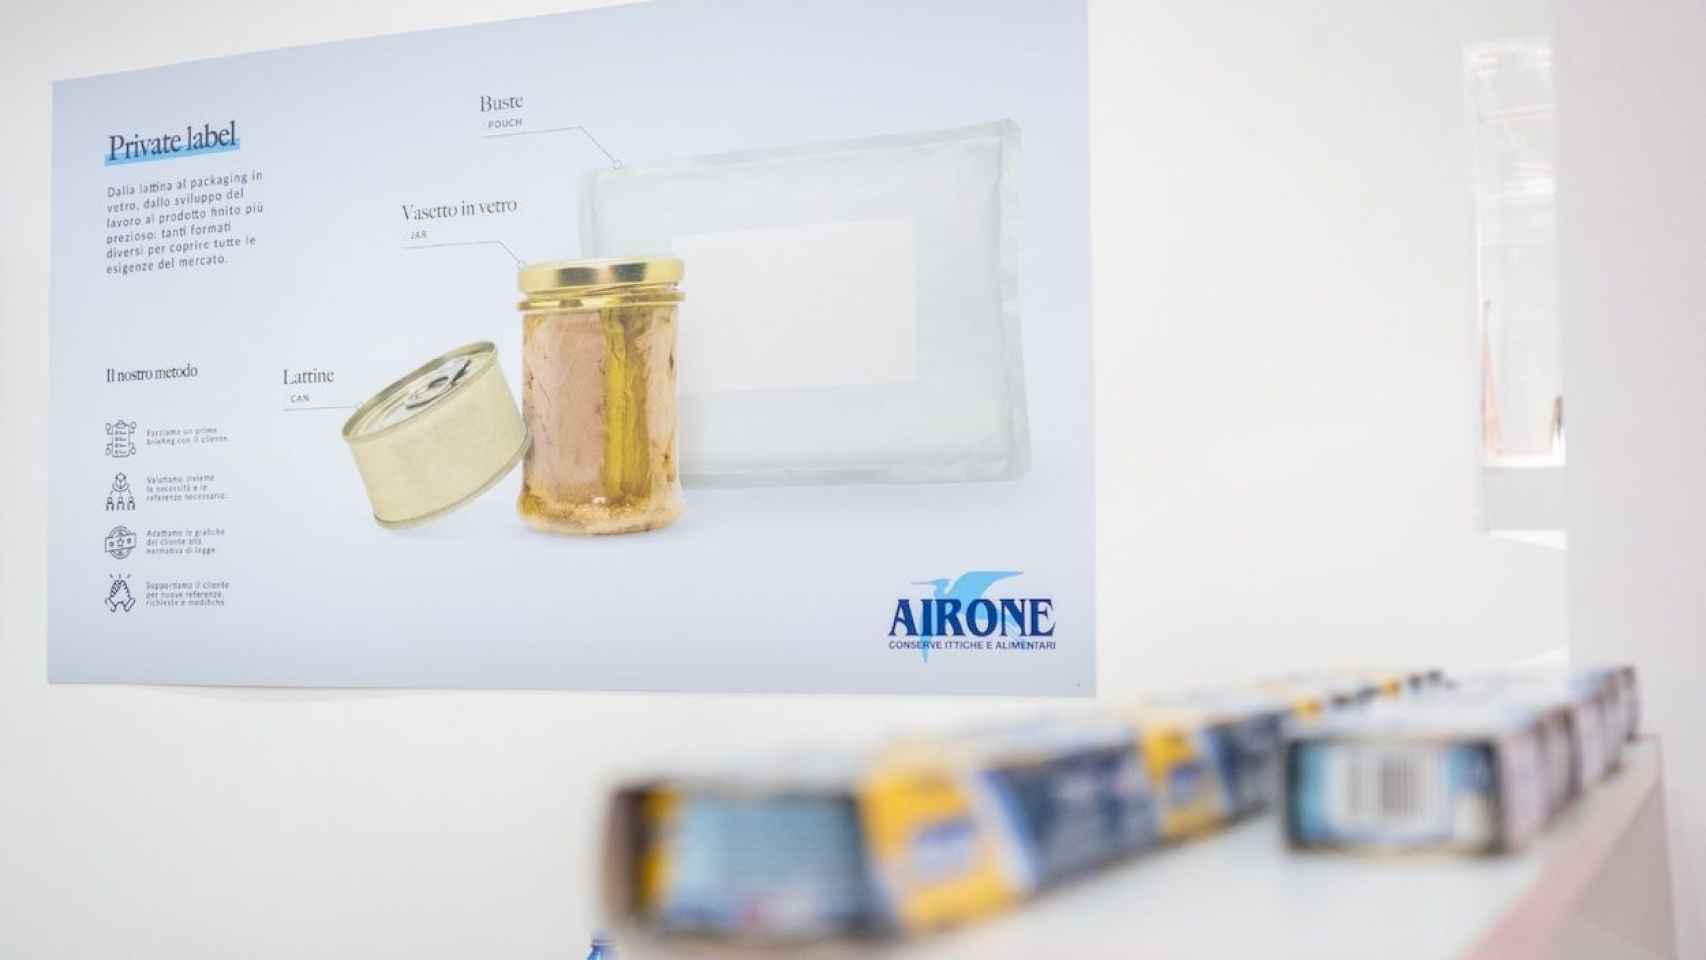 Expositor de Airone Seafood